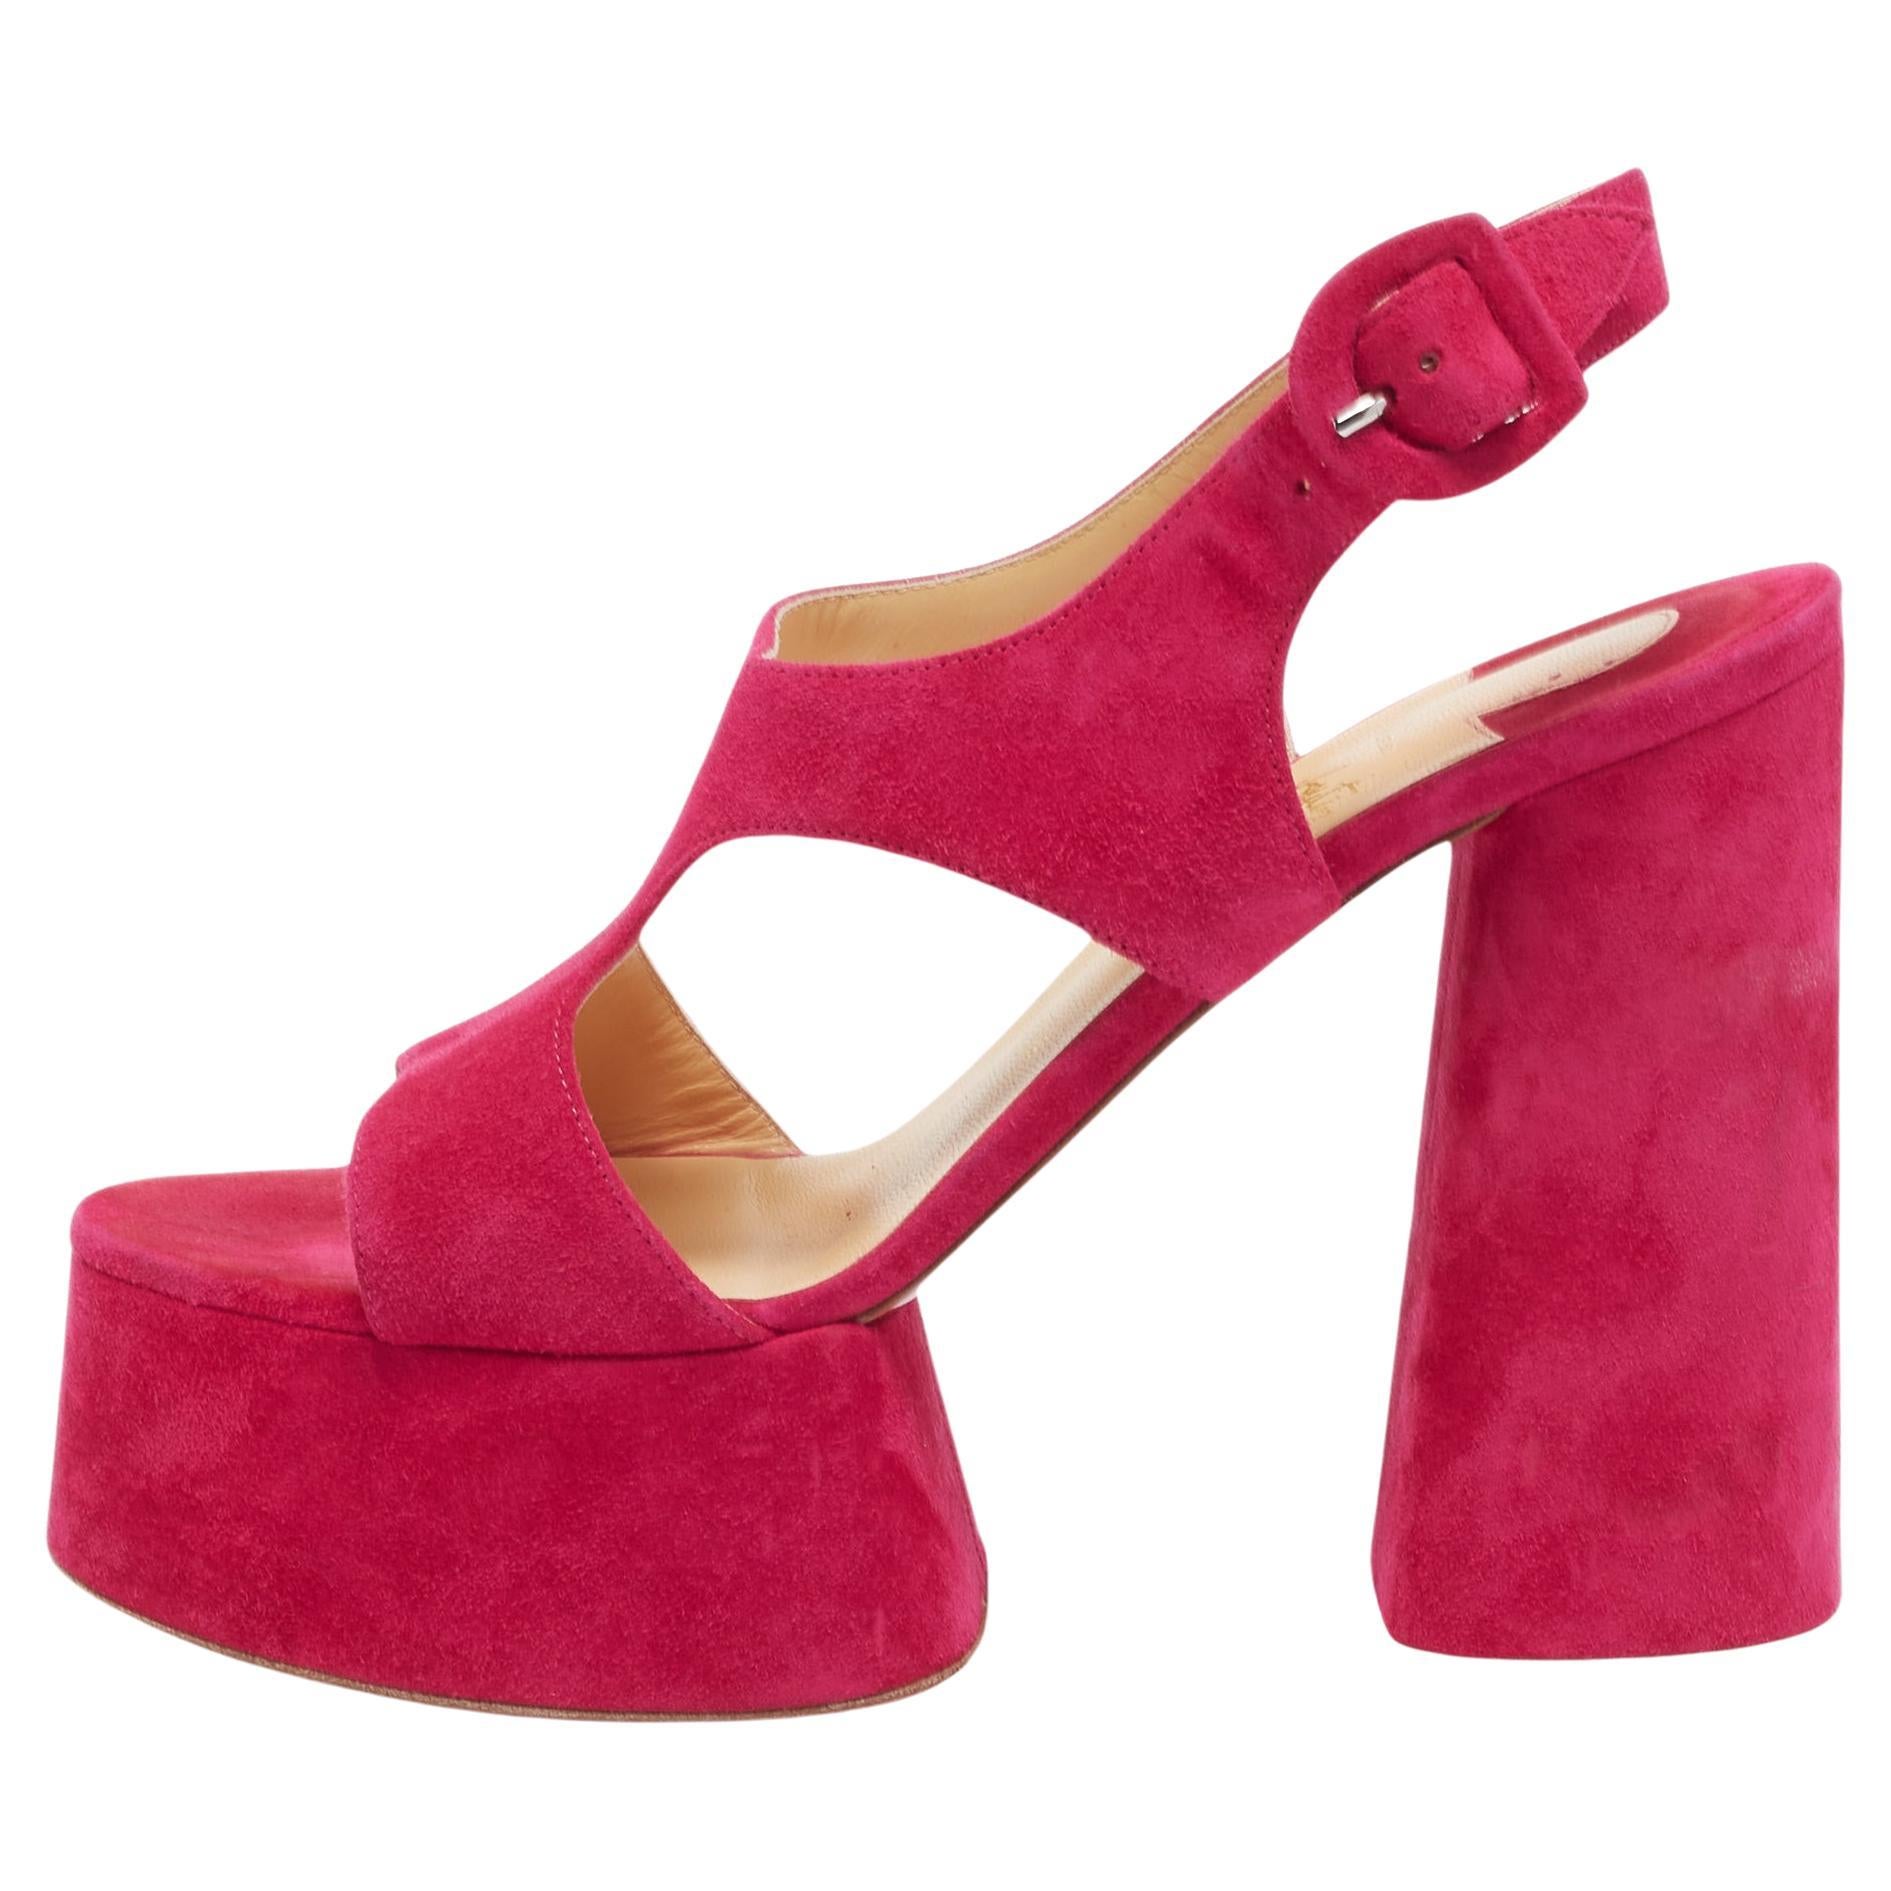 Christian Louboutin Pink Suede Foolish Sandals Size 39